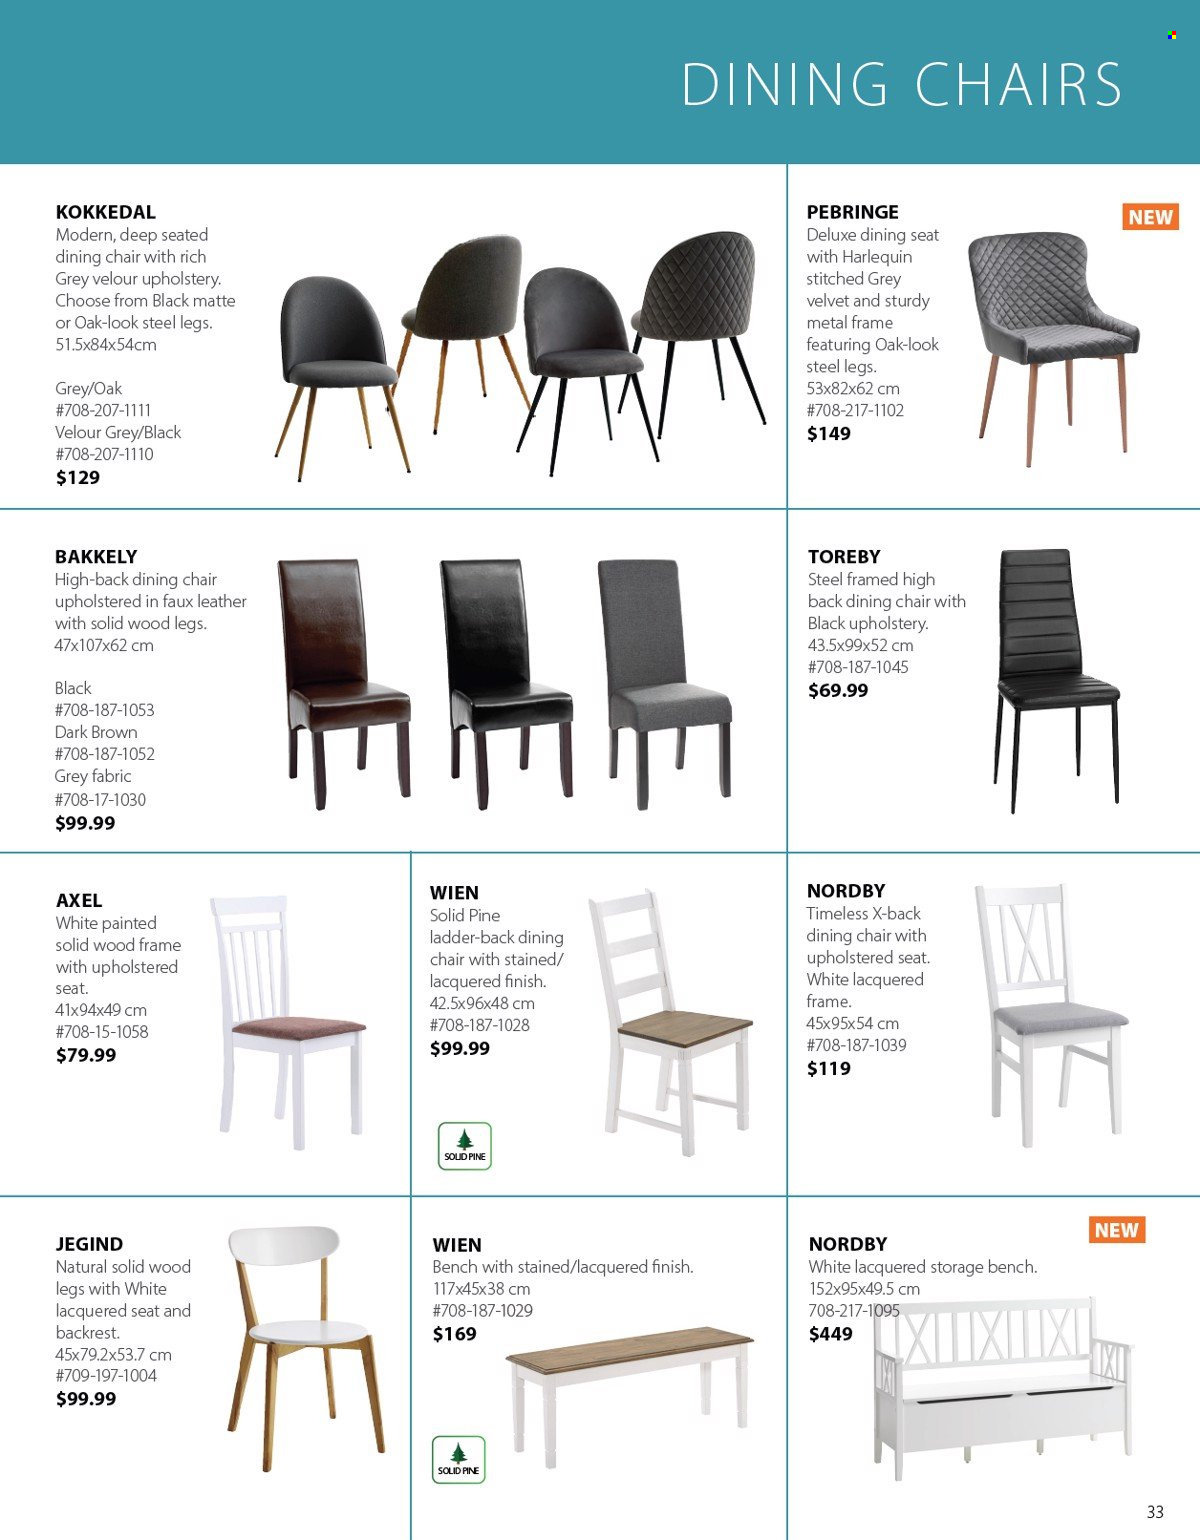 thumbnail - JYSK Flyer - Sales products - chair pad, chair, dining chair, bench, storage bench, metal frame, ladder. Page 33.